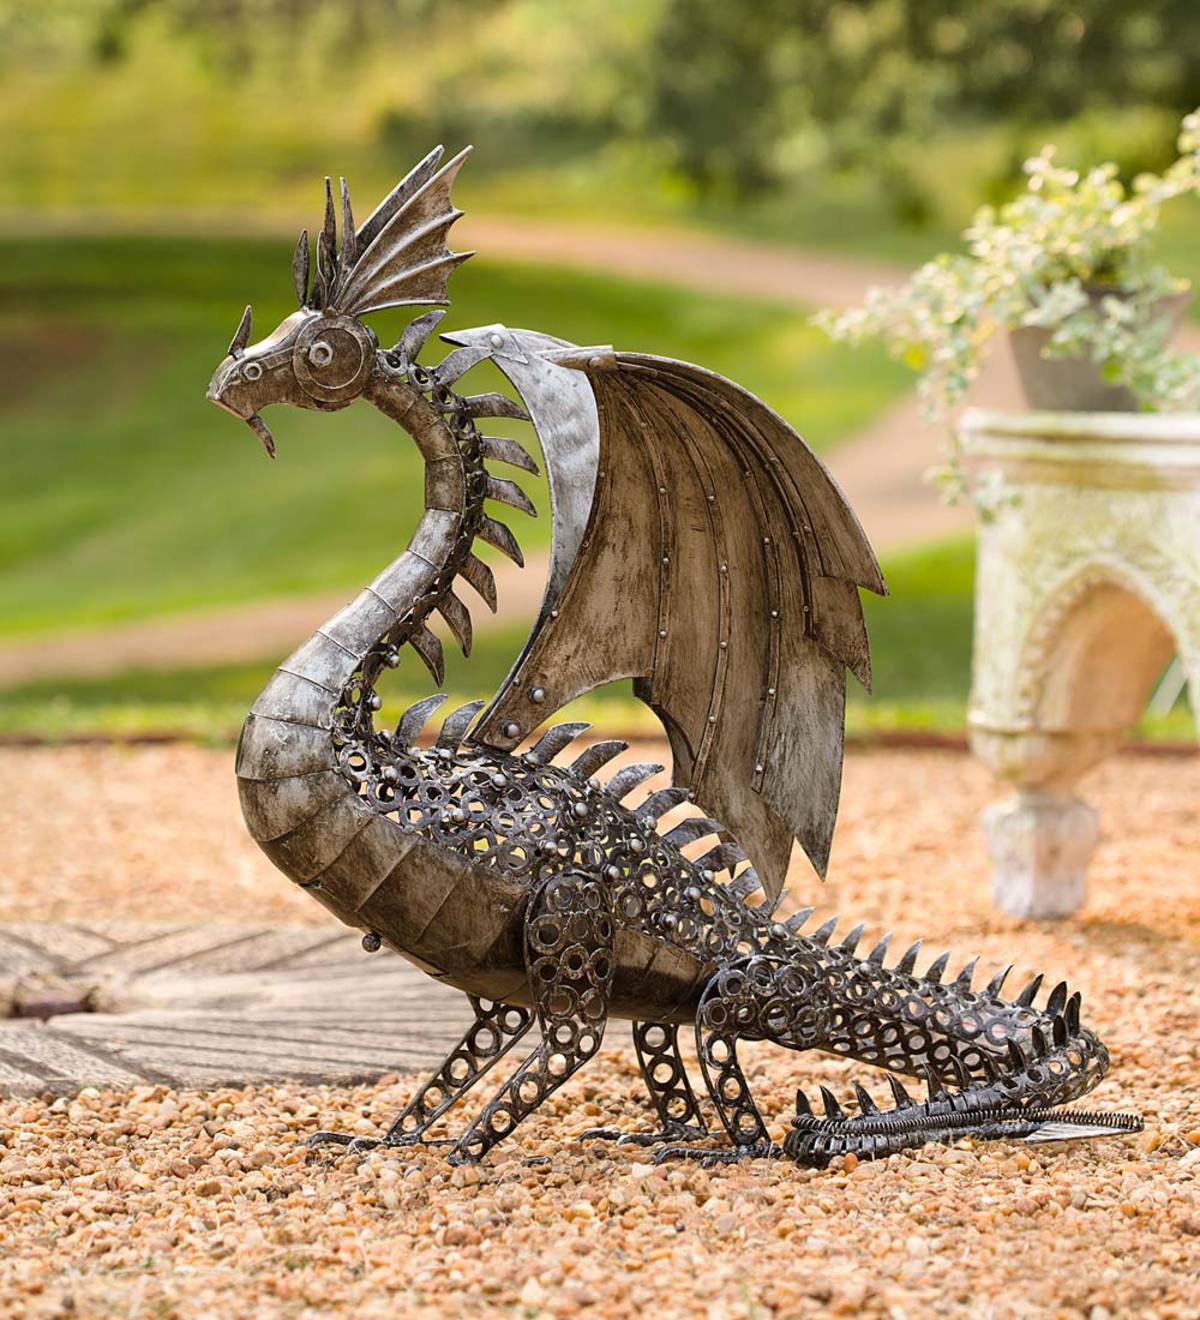 Details about   Pacific Giftware Industrial Steampunk Dragon Sculpture Resin Figurine Home Decor 